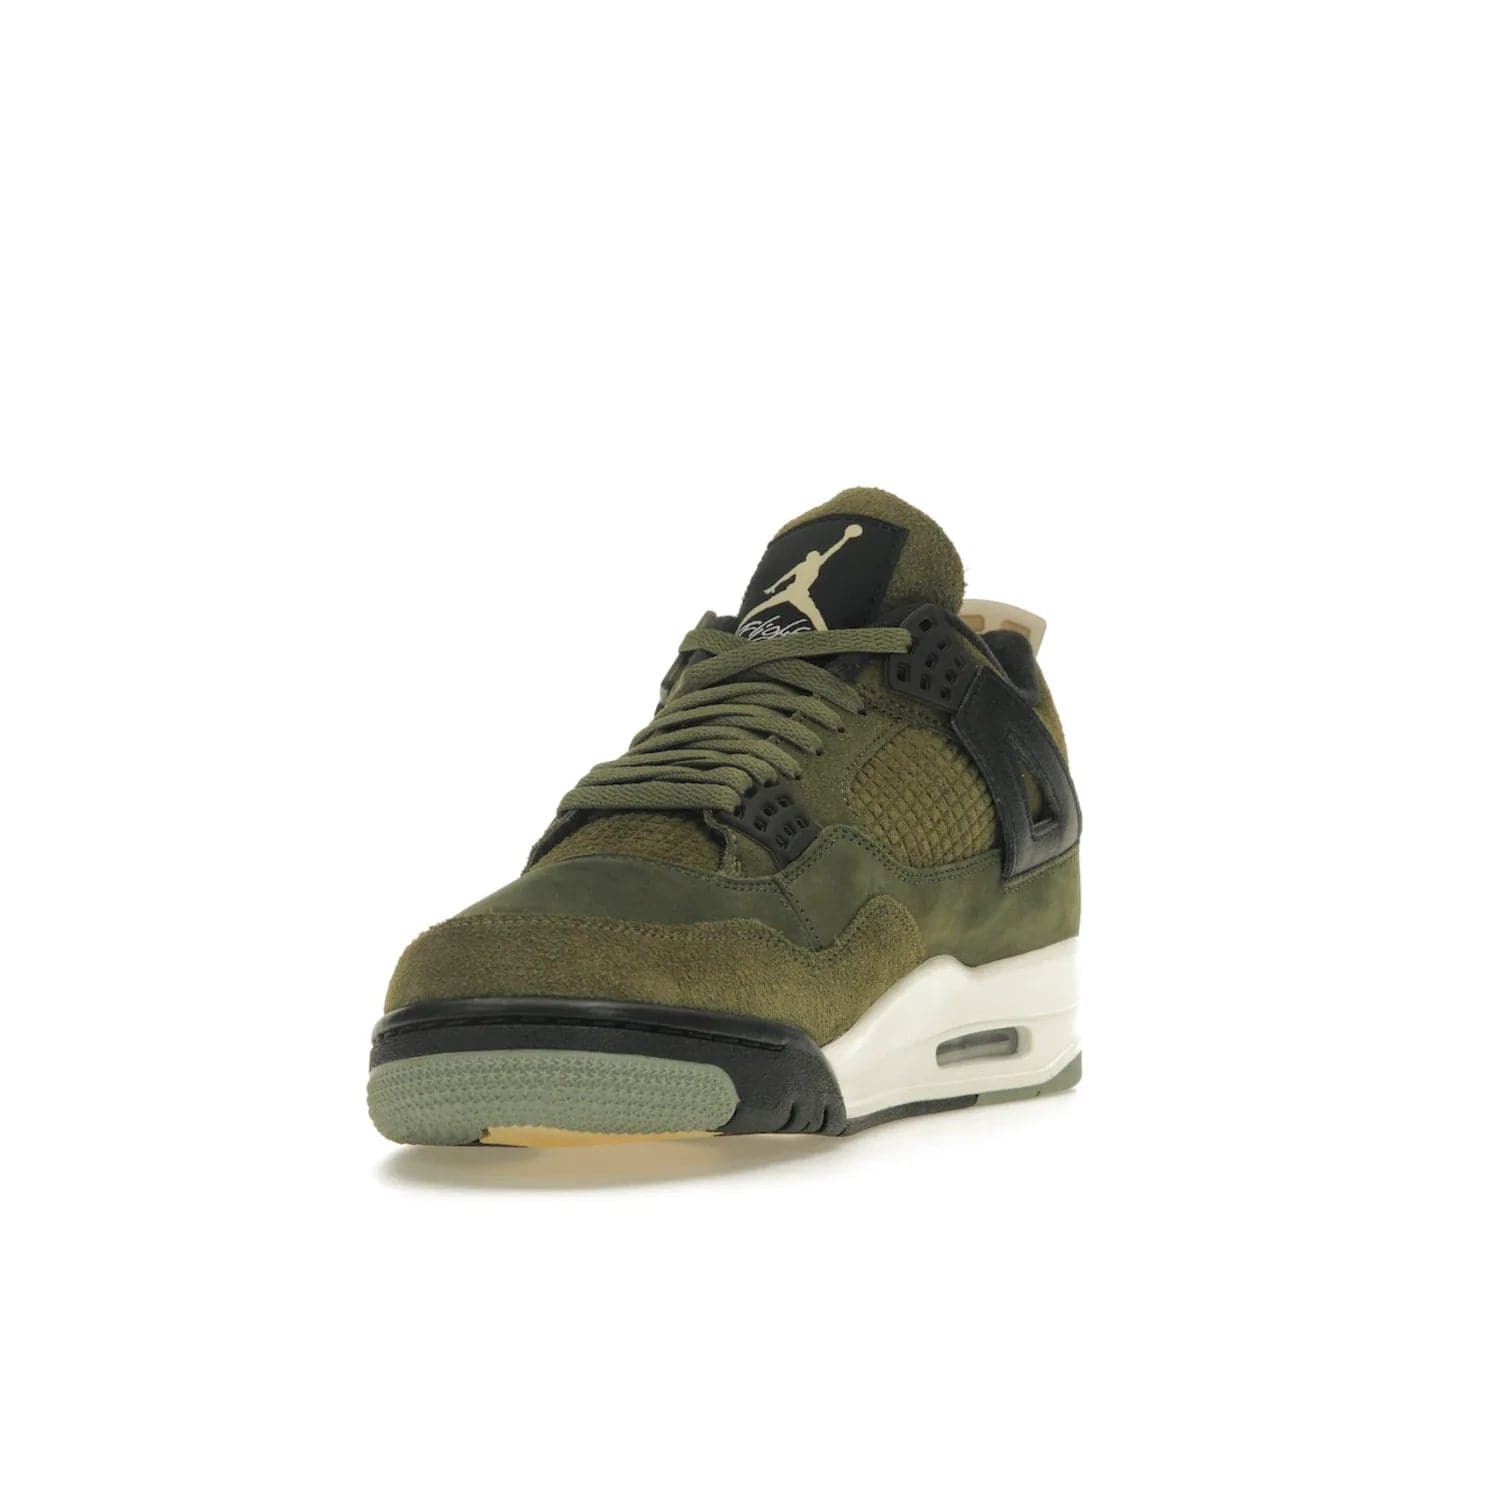 Jordan 4 Retro SE Craft Medium Olive - Image 13 - Only at www.BallersClubKickz.com - Grab the Jordan 4 Retro SE Crafts for a unique style. Combines Medium Olive, Pale Vanilla, Khaki, Black and Sail, with same classic shape, cushioning, and rubber outsole. Available on November 18th!